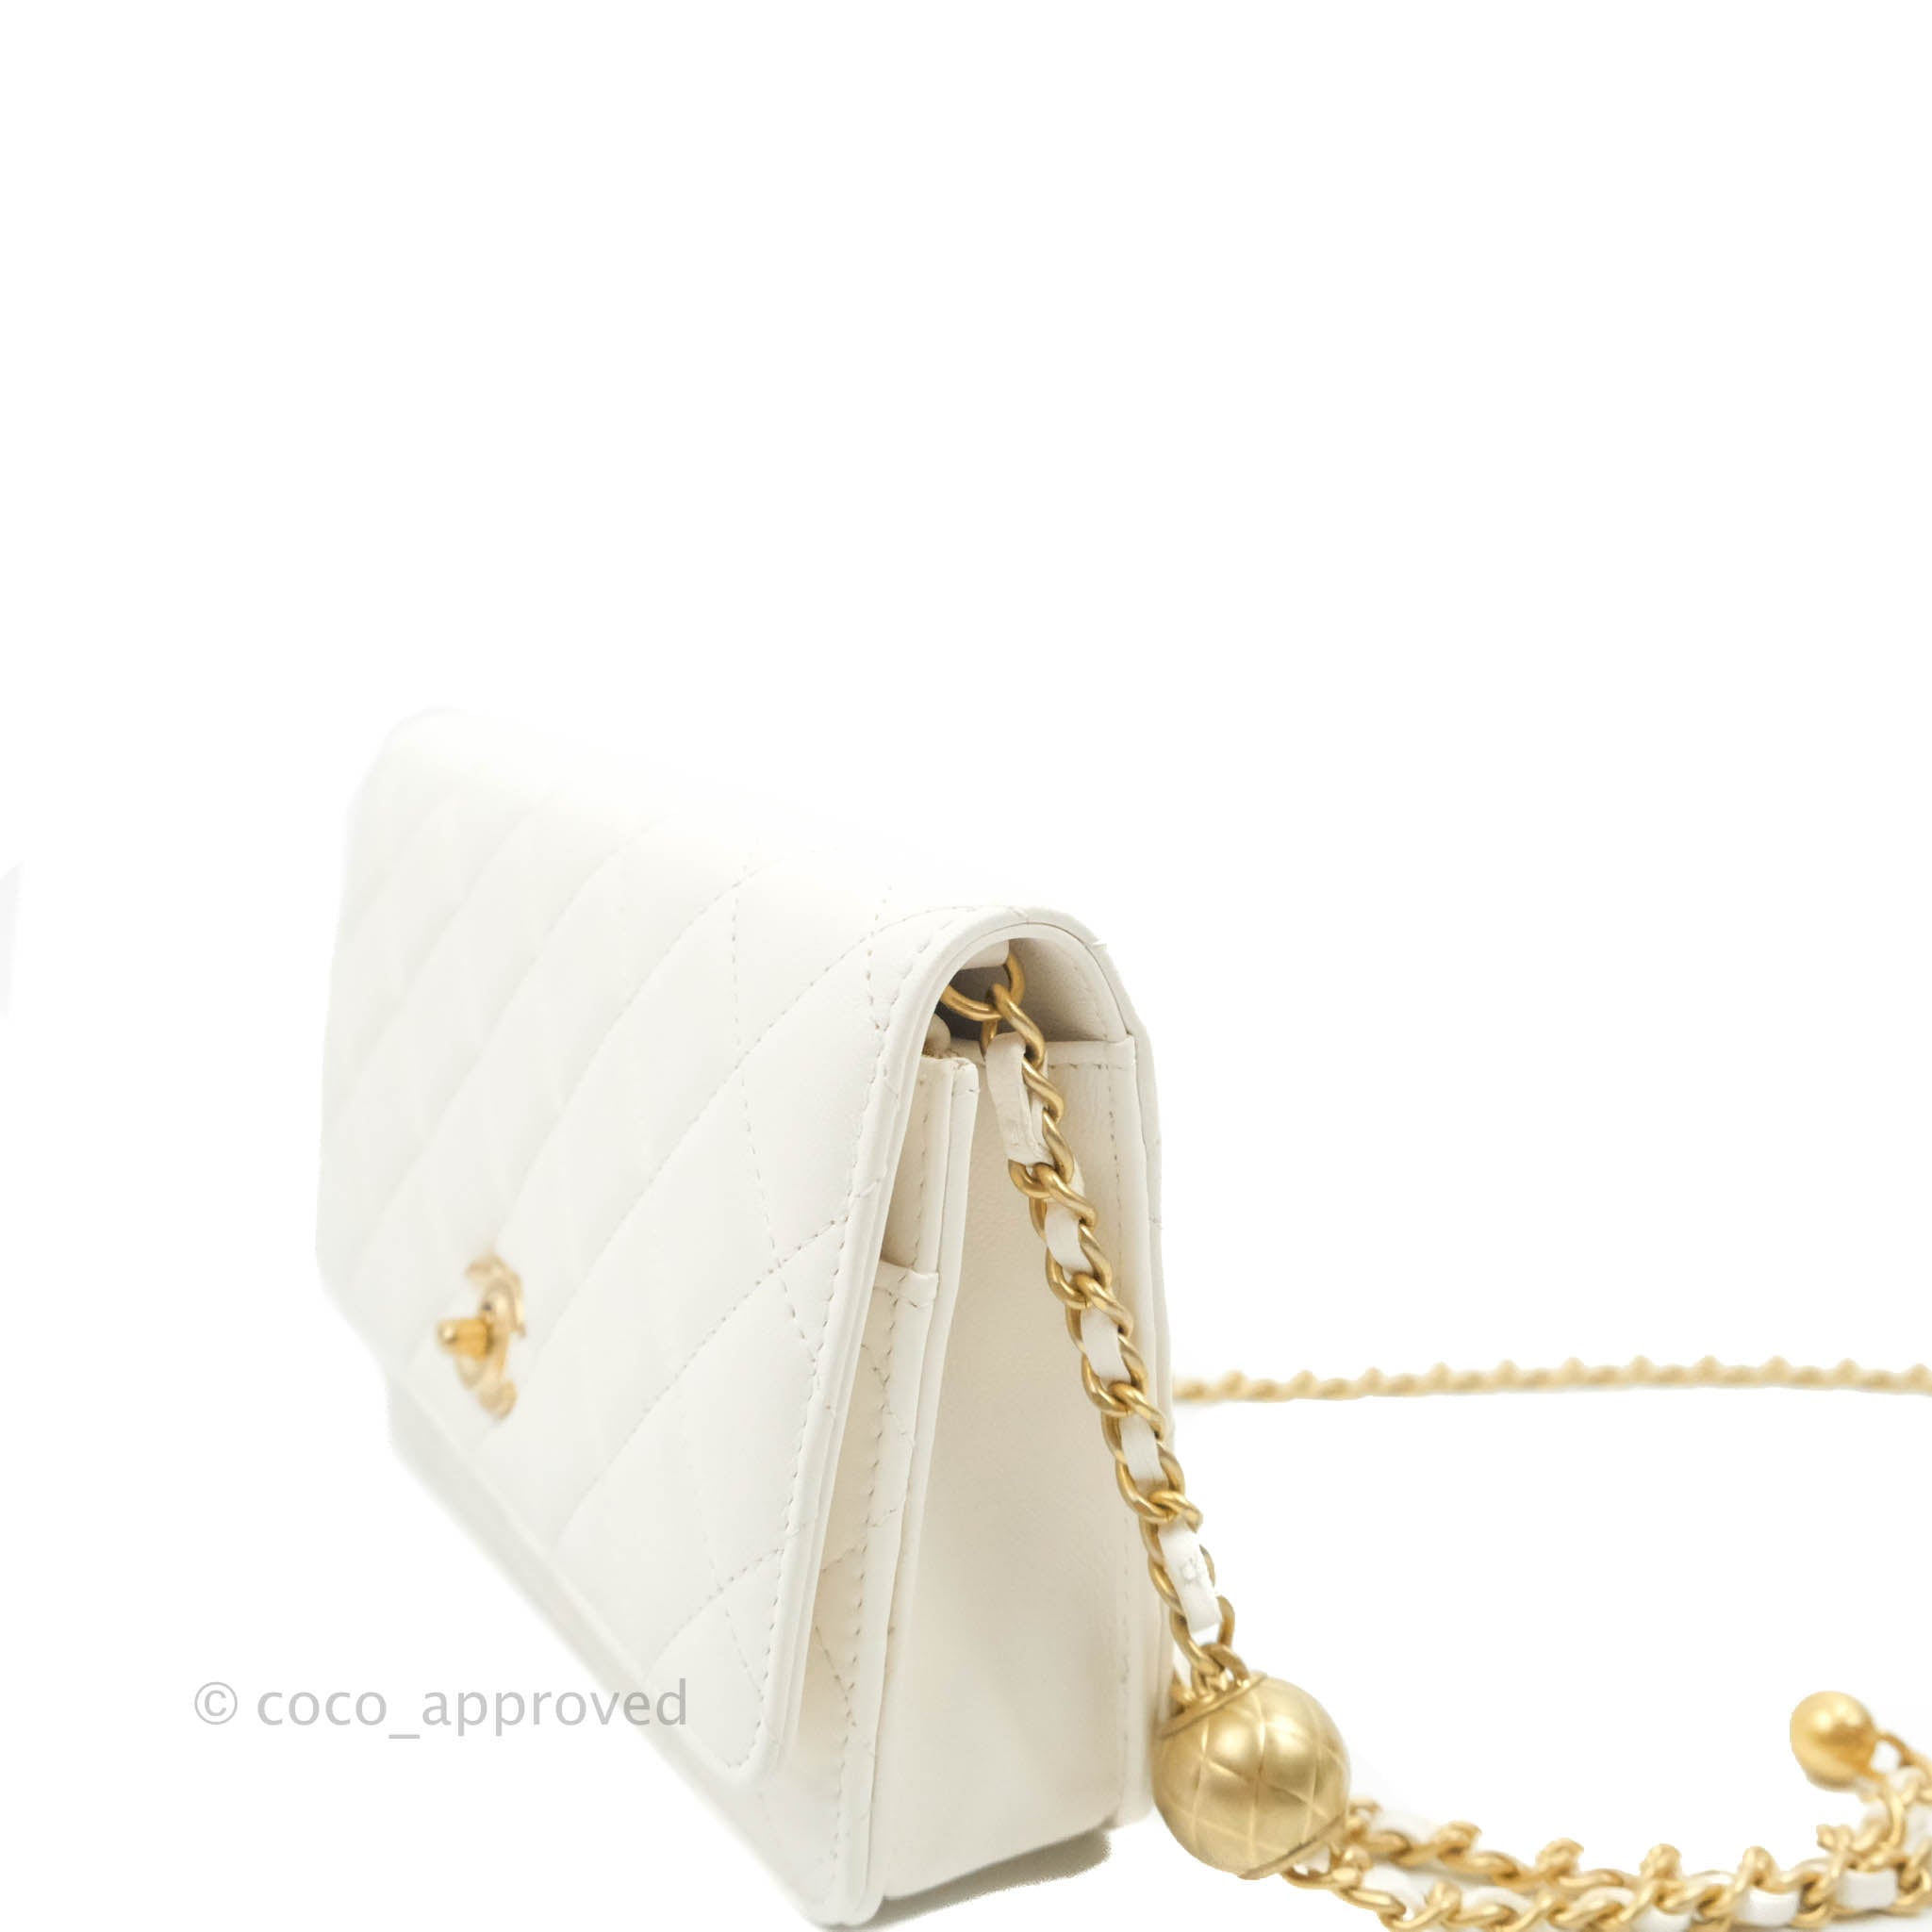 CHANEL Lambskin Quilted CC Pearl Crush Wallet on Chain WOC White